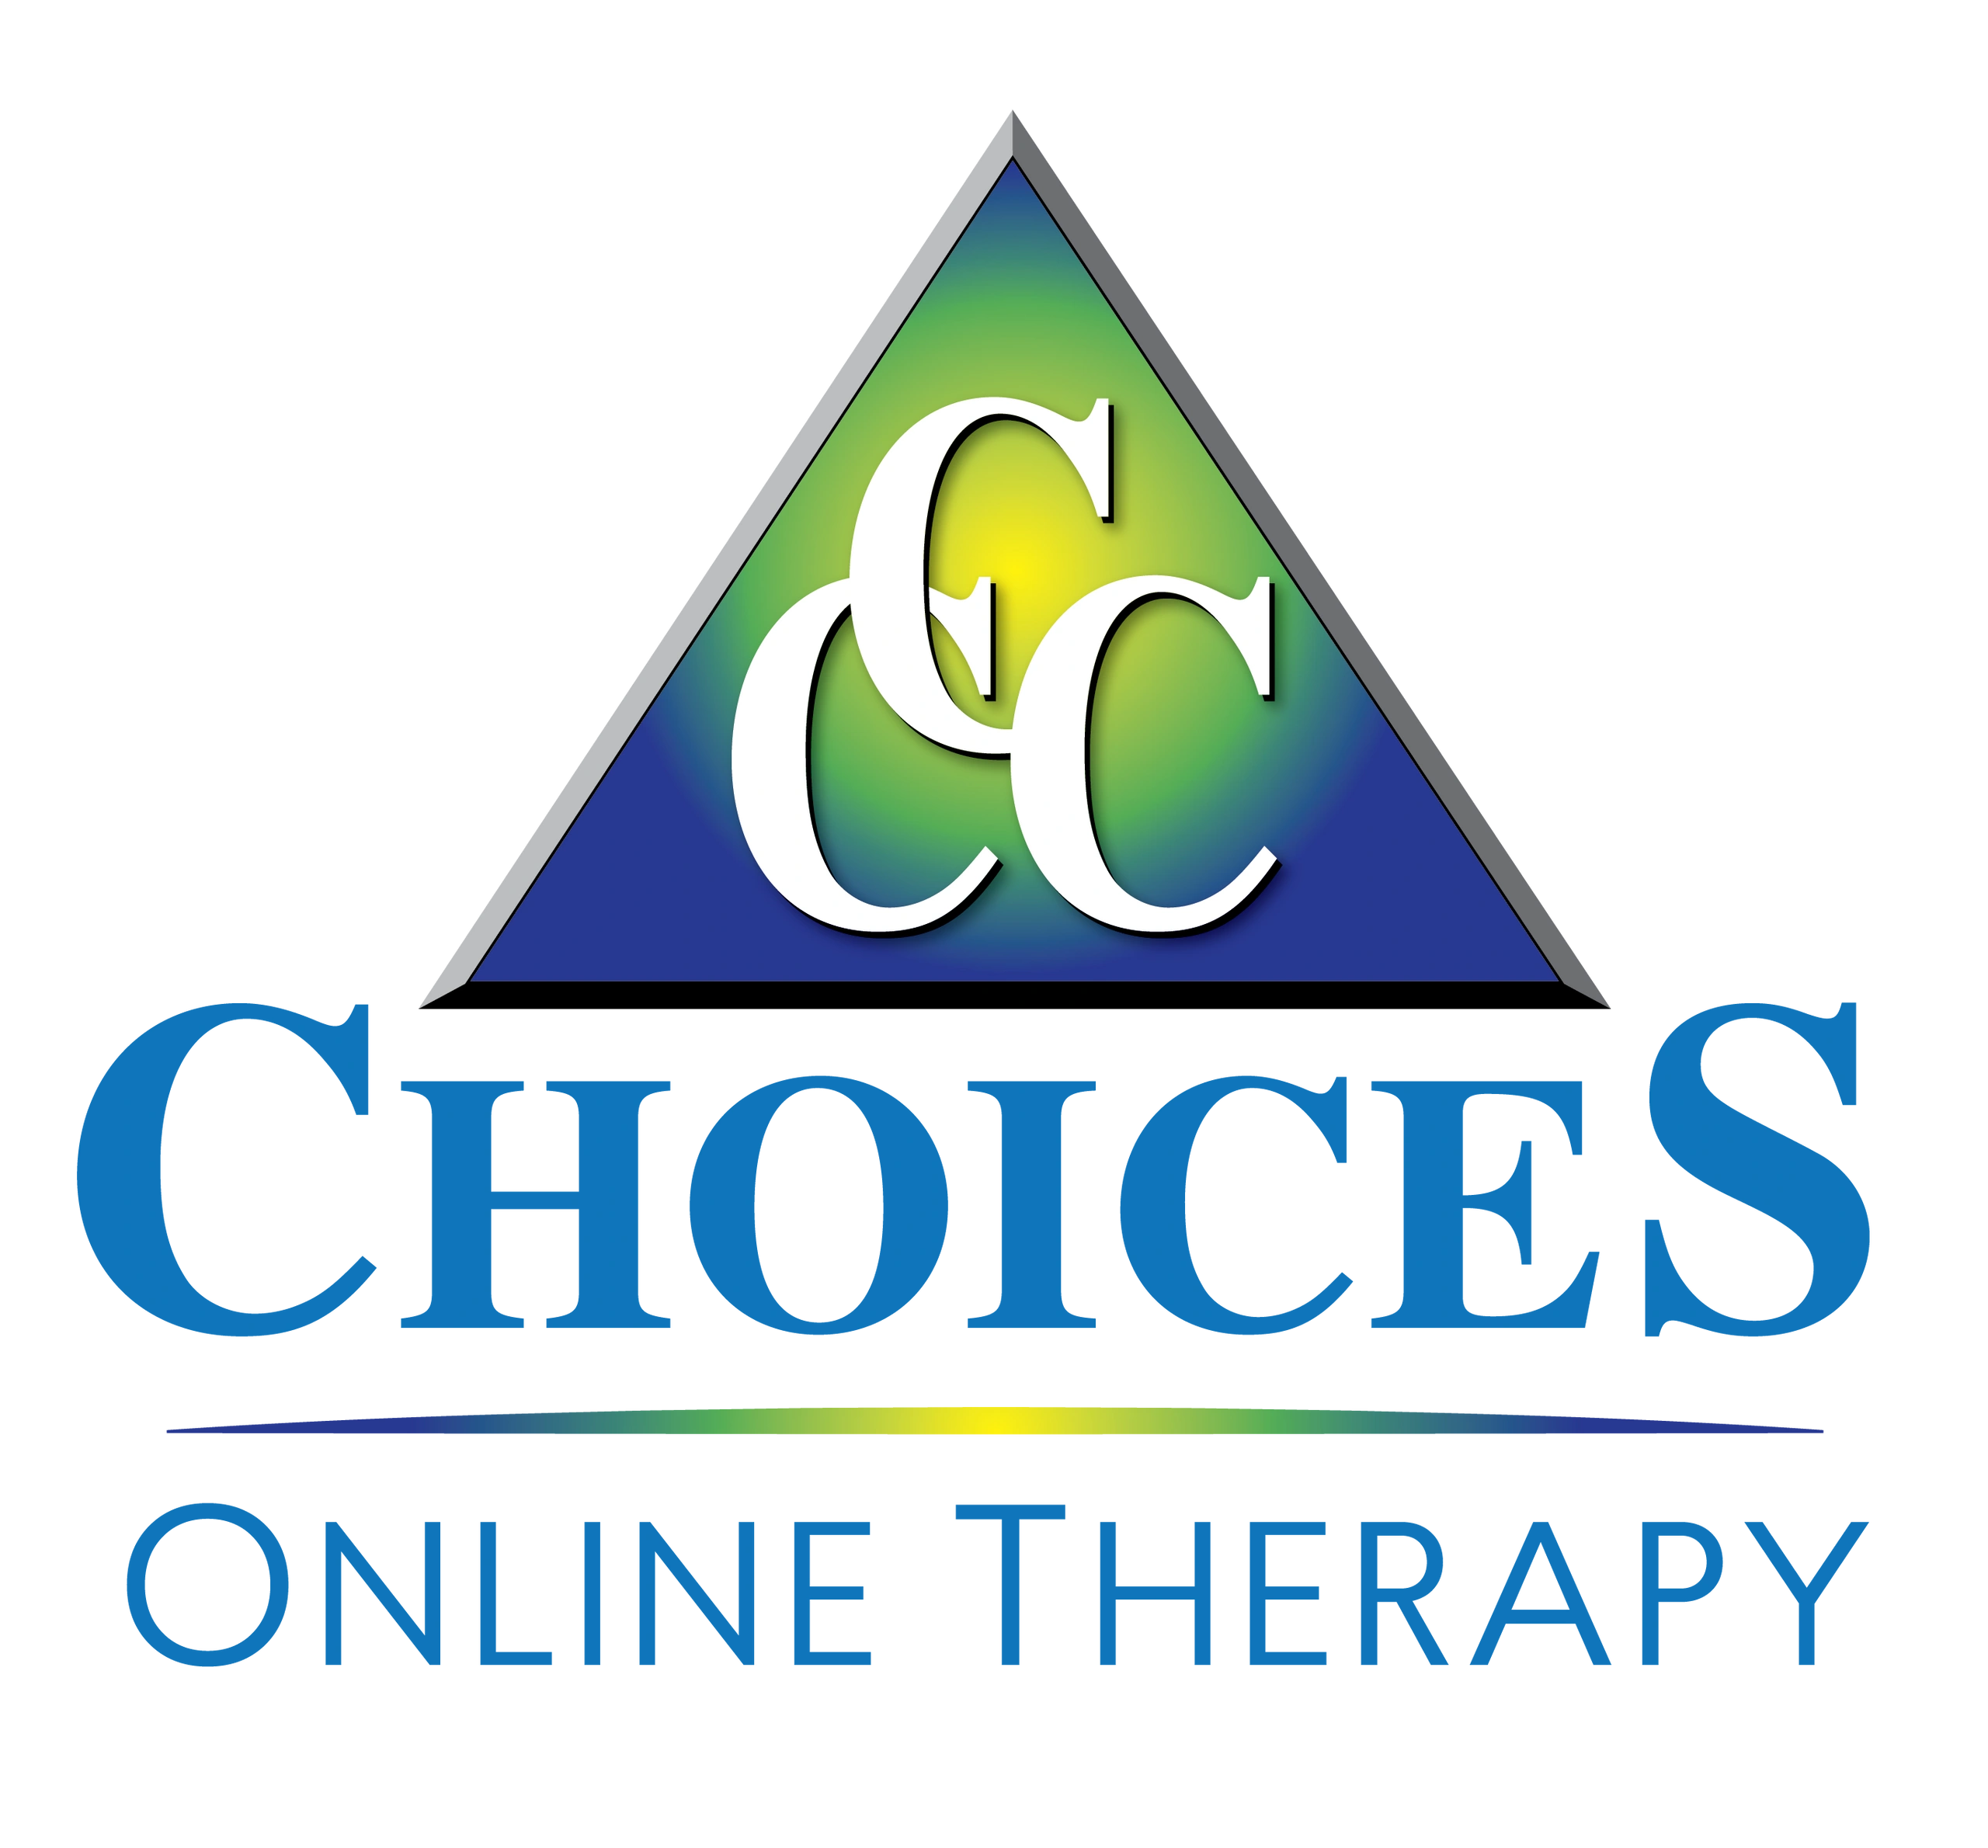 Online counseling services, Greensburg PA. Mental health services virtually.  Mental health services